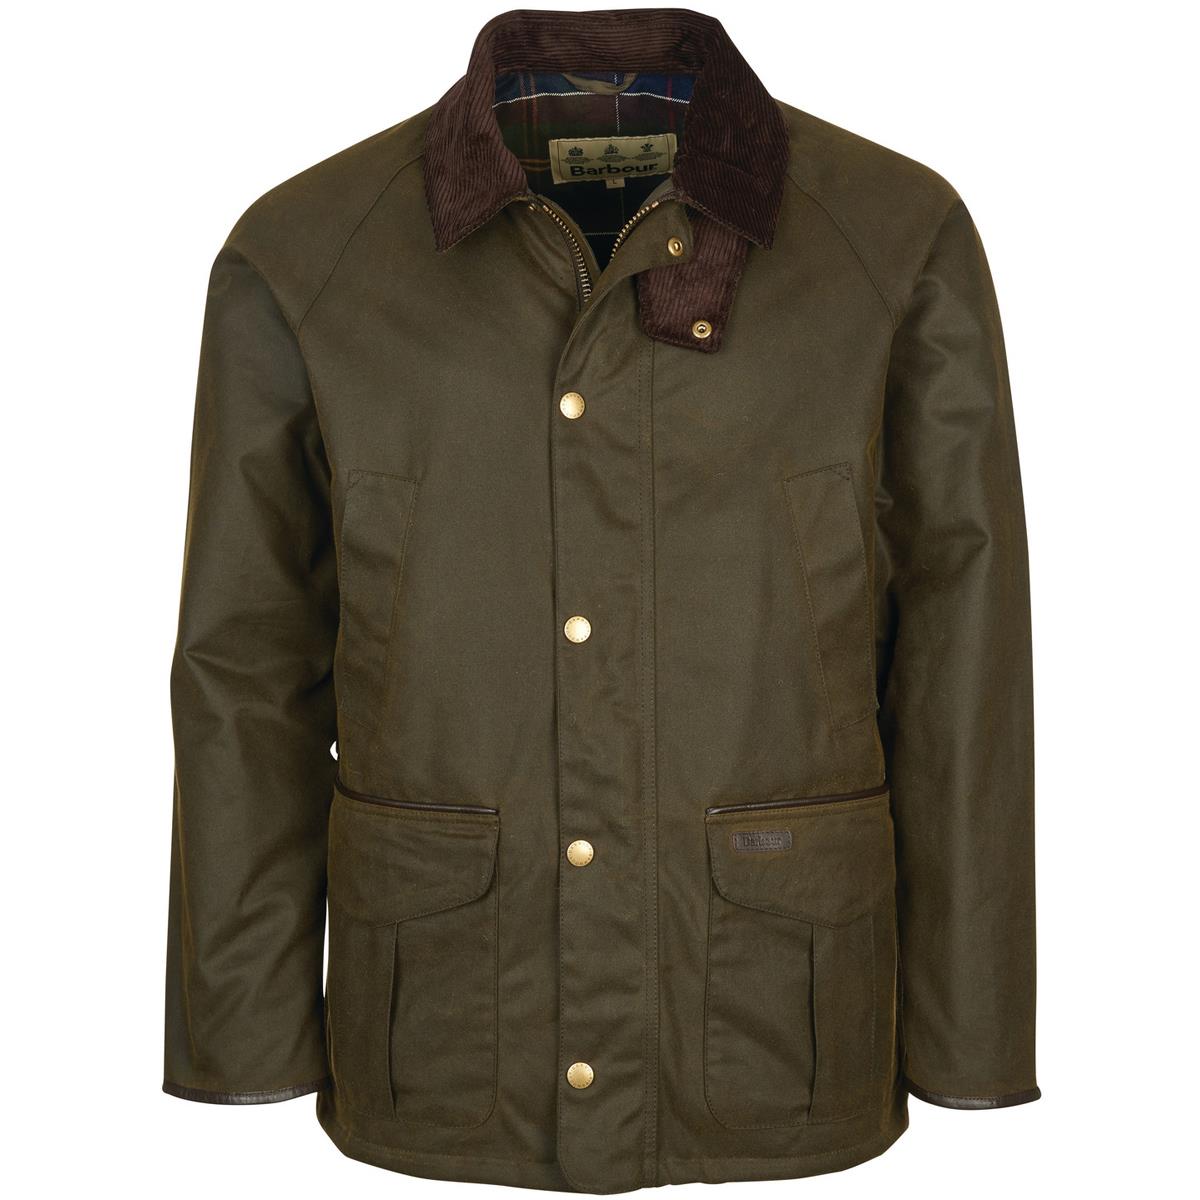 How should I care for my Barbour Stratford Men's Wax Jacket?